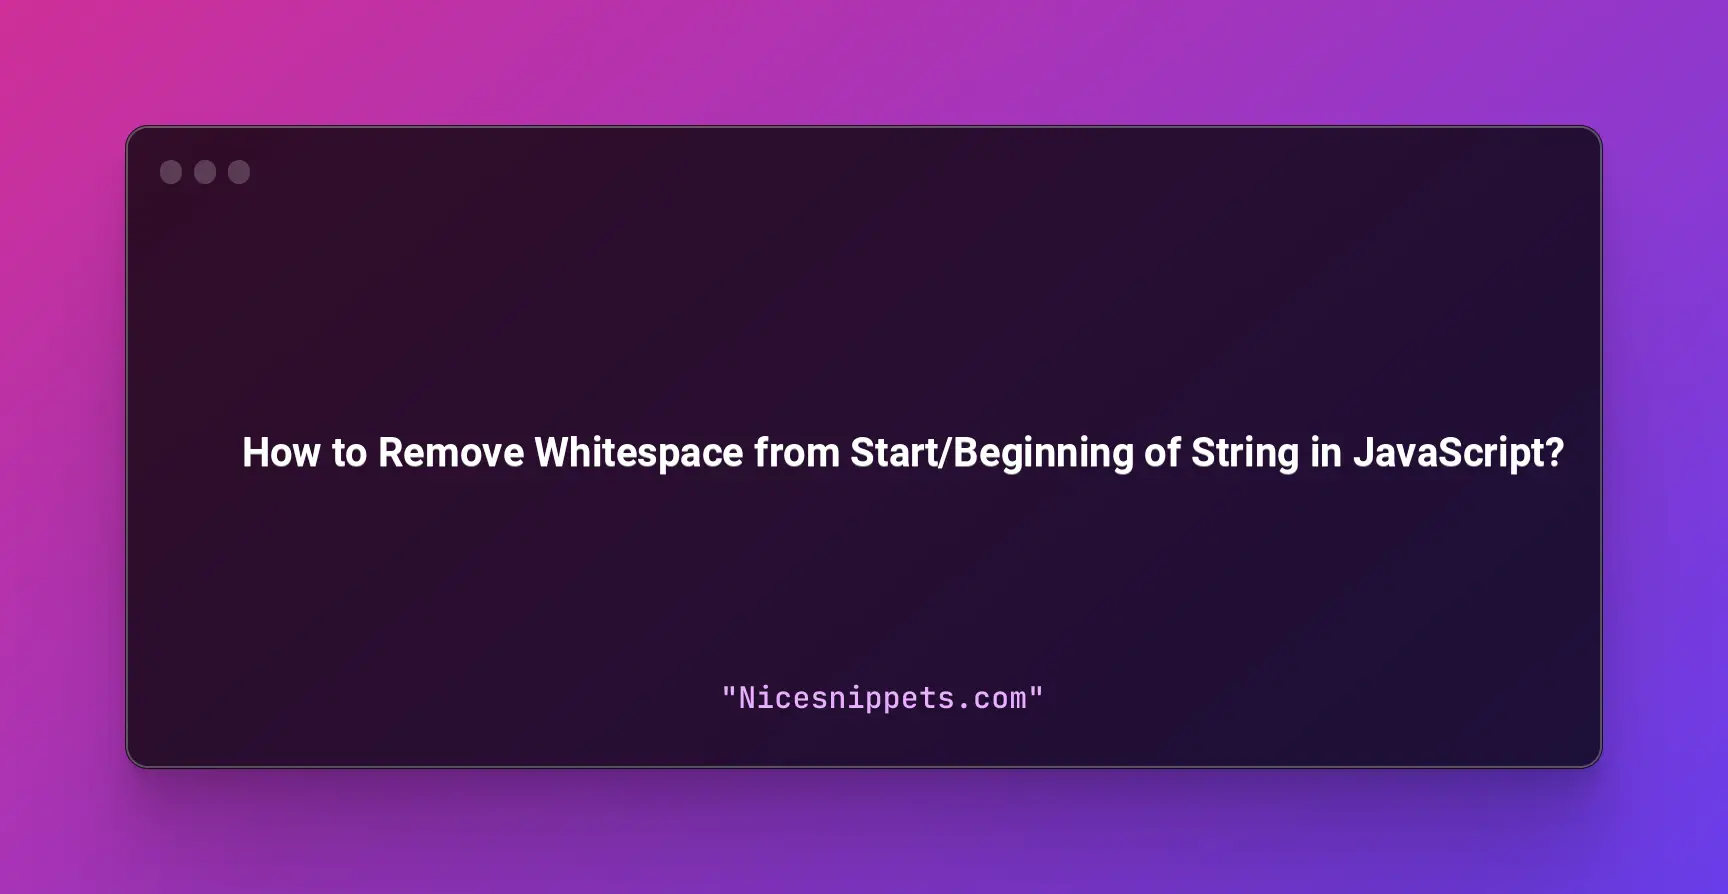 How to Remove Whitespace from Start/Beginning of String in JavaScript?